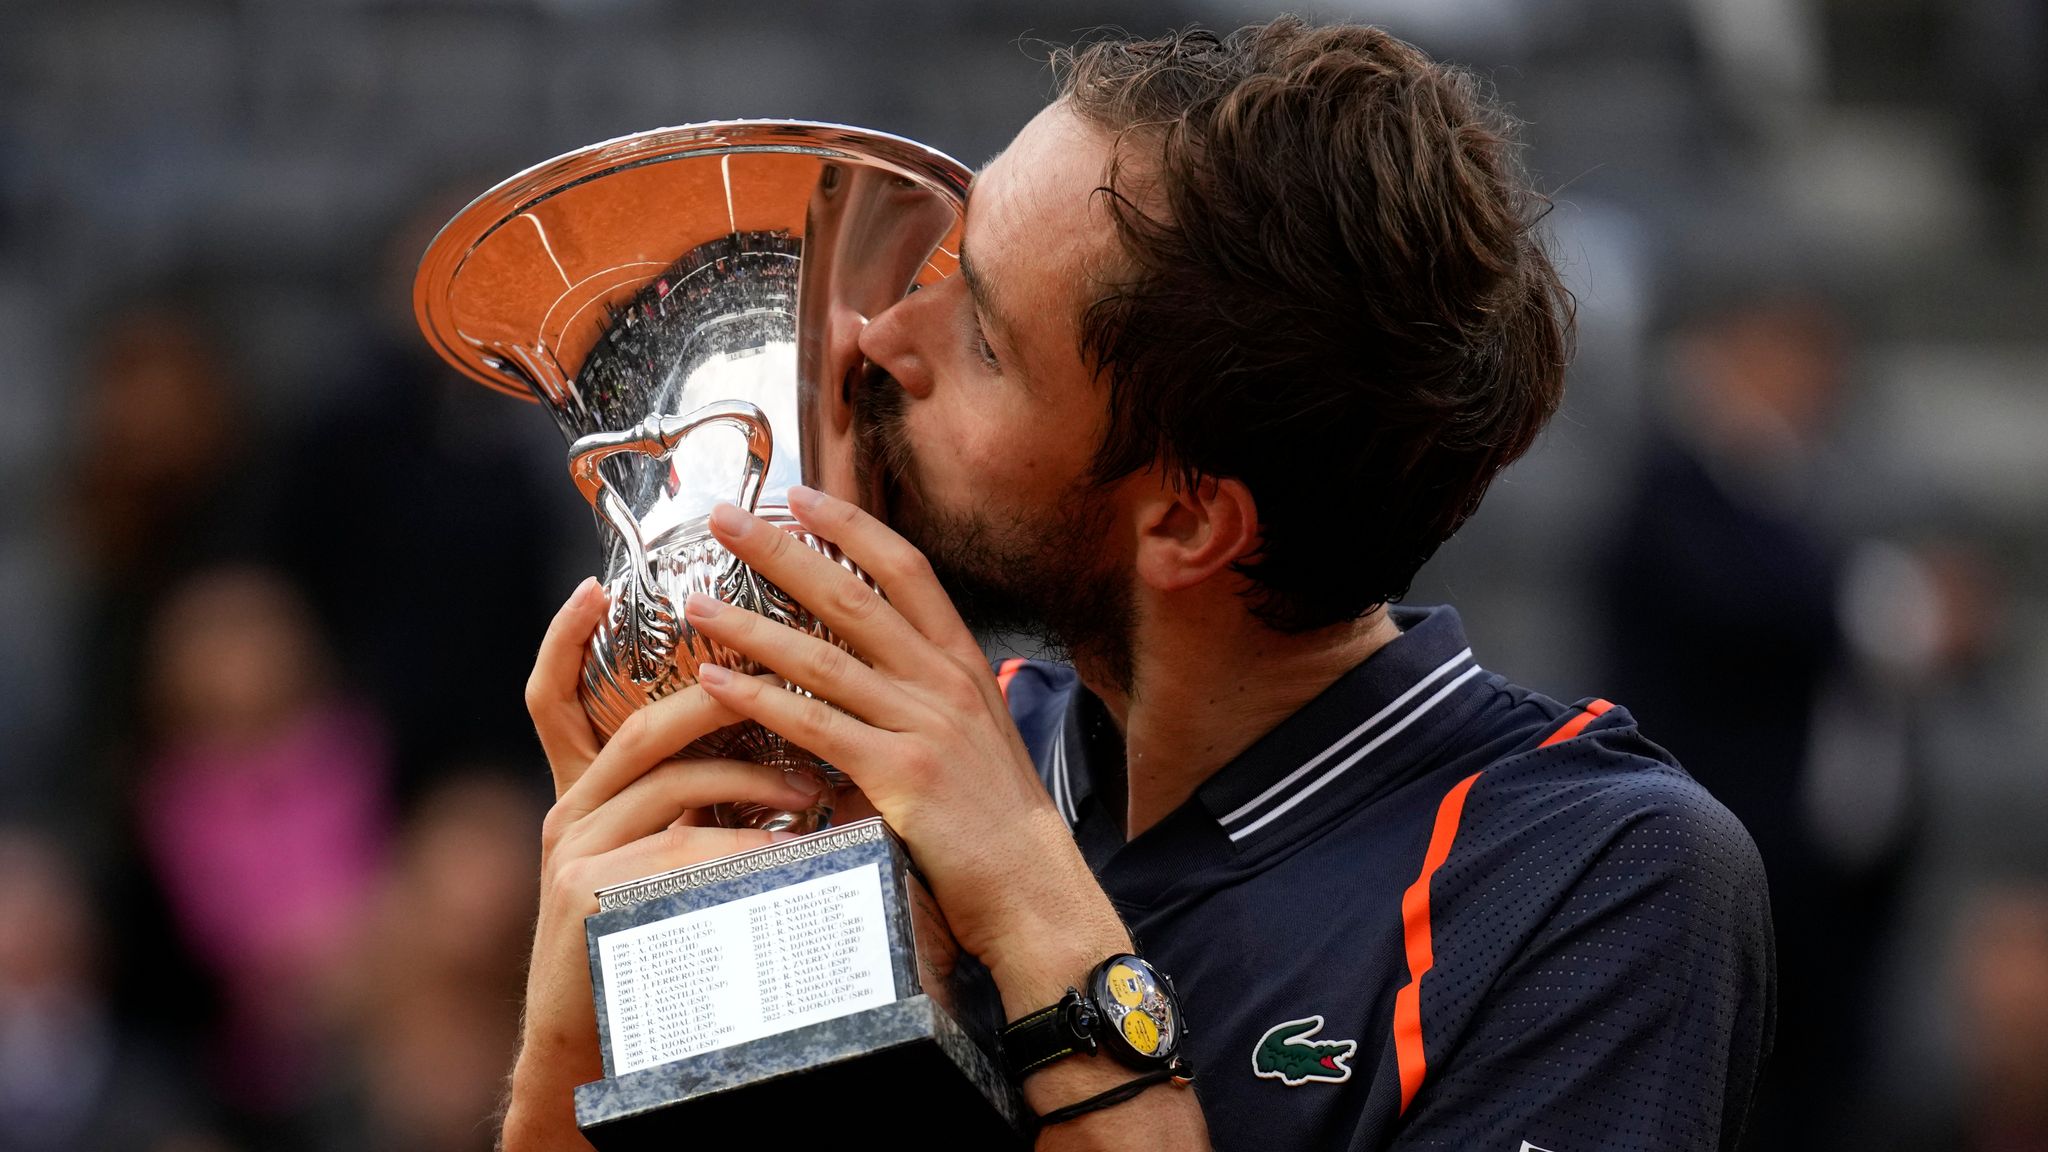 Medvdev wins Italian Open for the first time